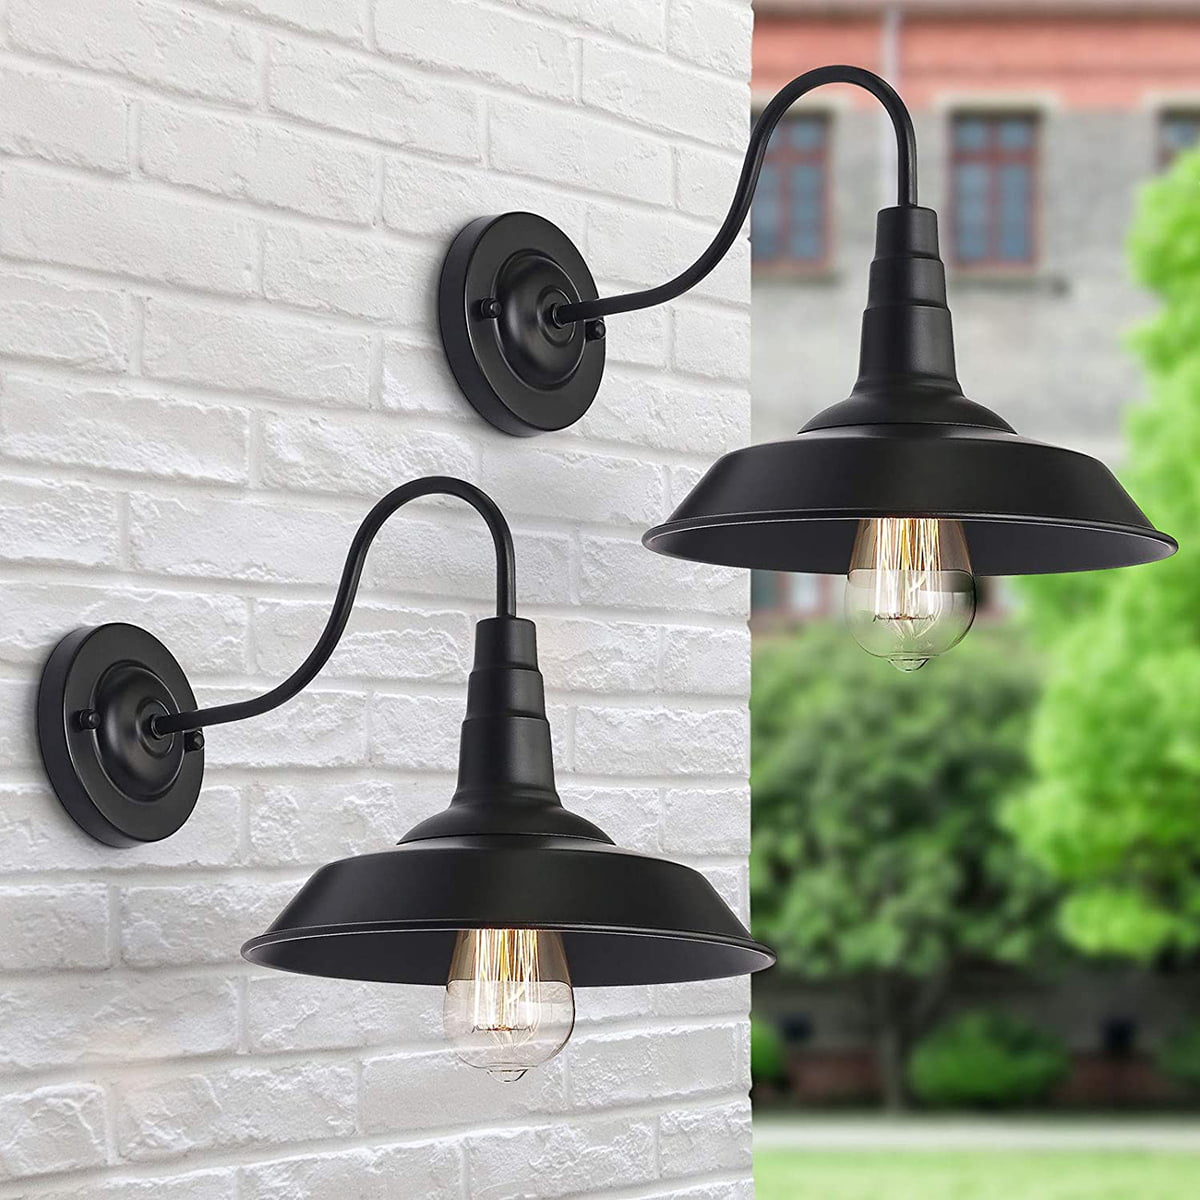 US 2pcs Wall Light Fixtures Rustic Vintage Iron Sconce Outdoor Edison Wall Lamp 